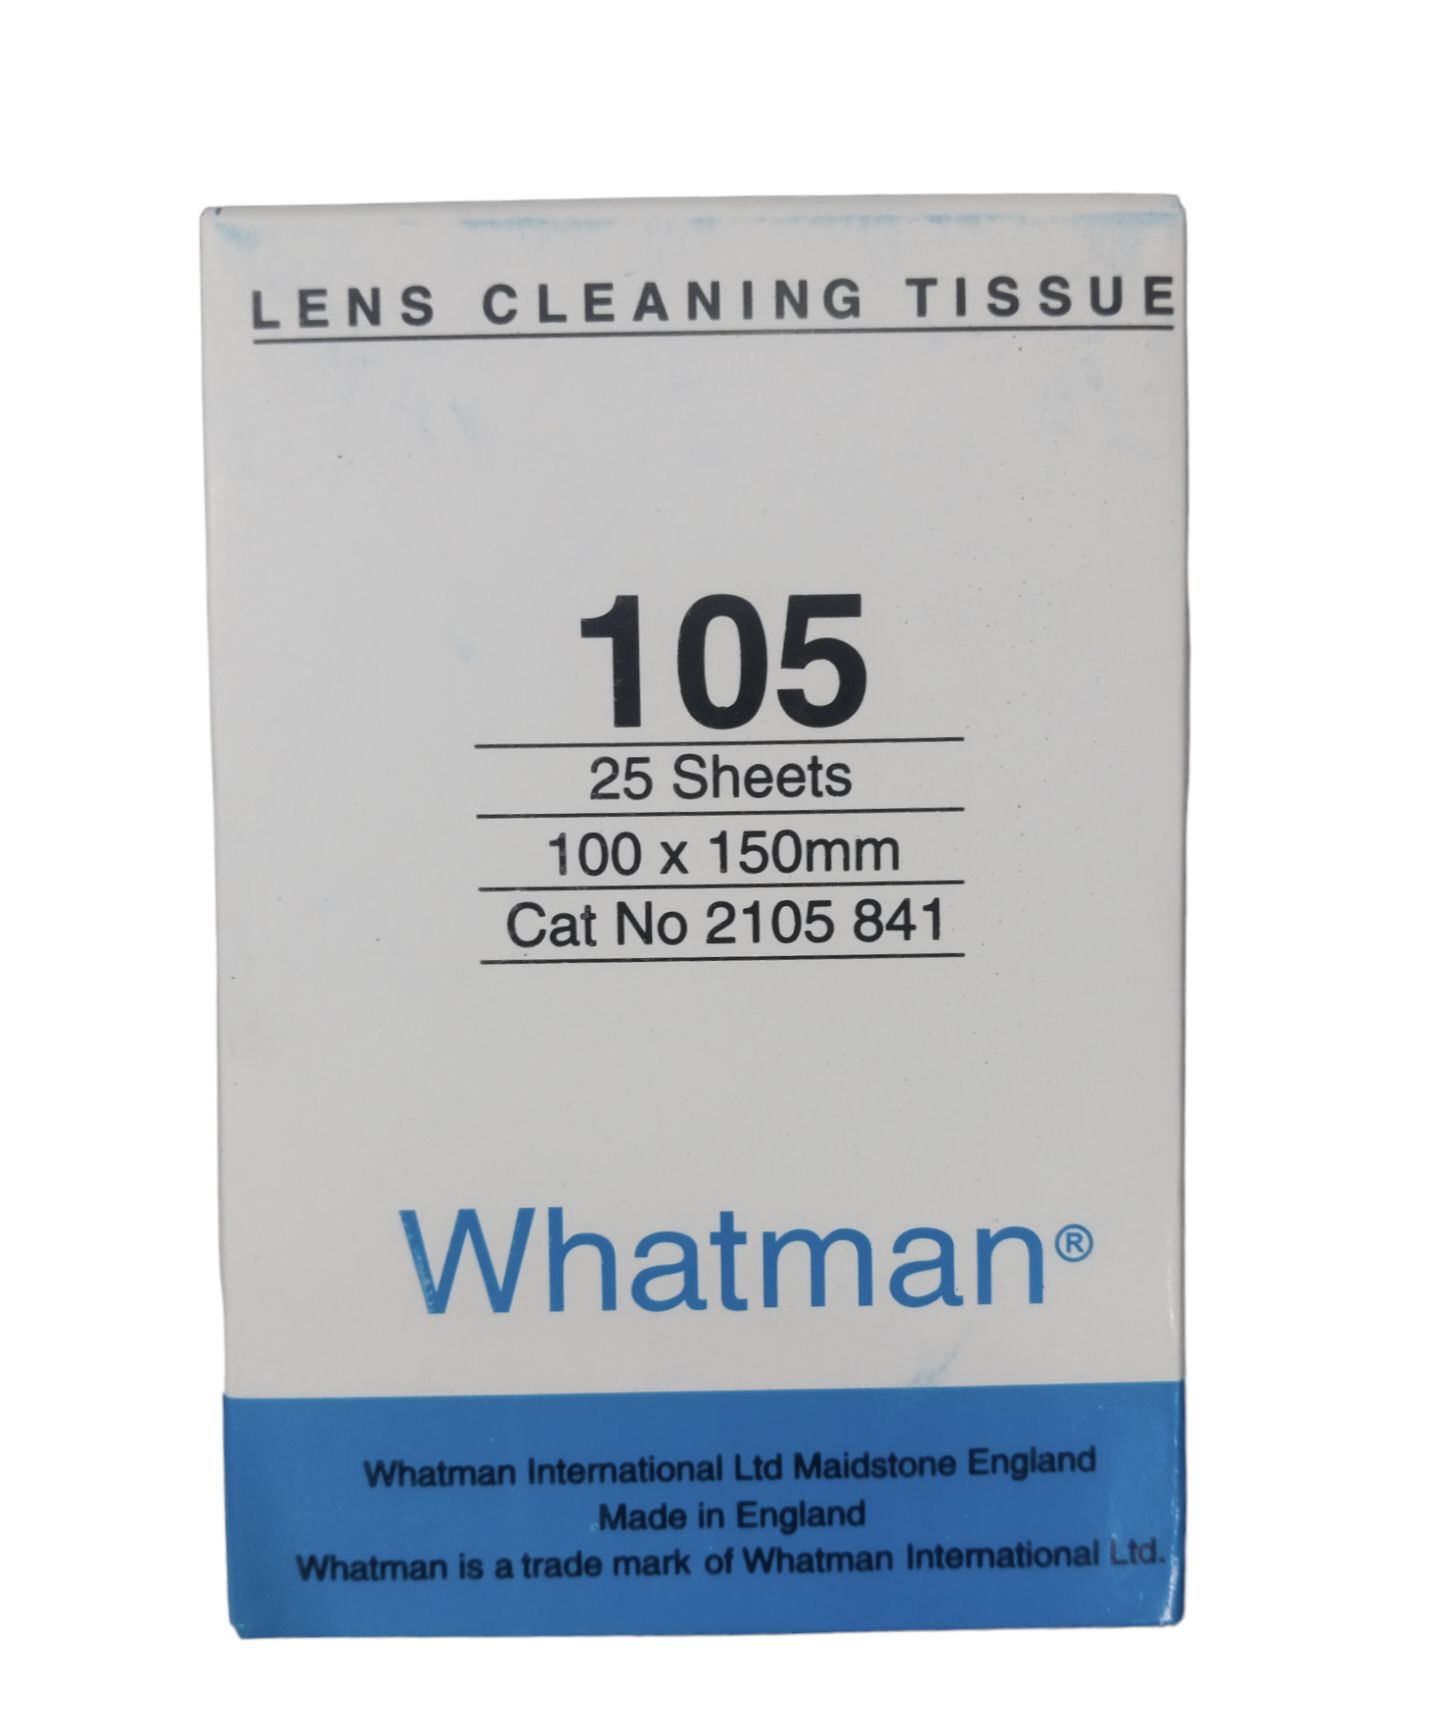 Whatman Lens Cleaning Tissue, Grade 105, W × L 100 mm × 150 mm, Pkg of (25 Wallets of 25 Sheets)